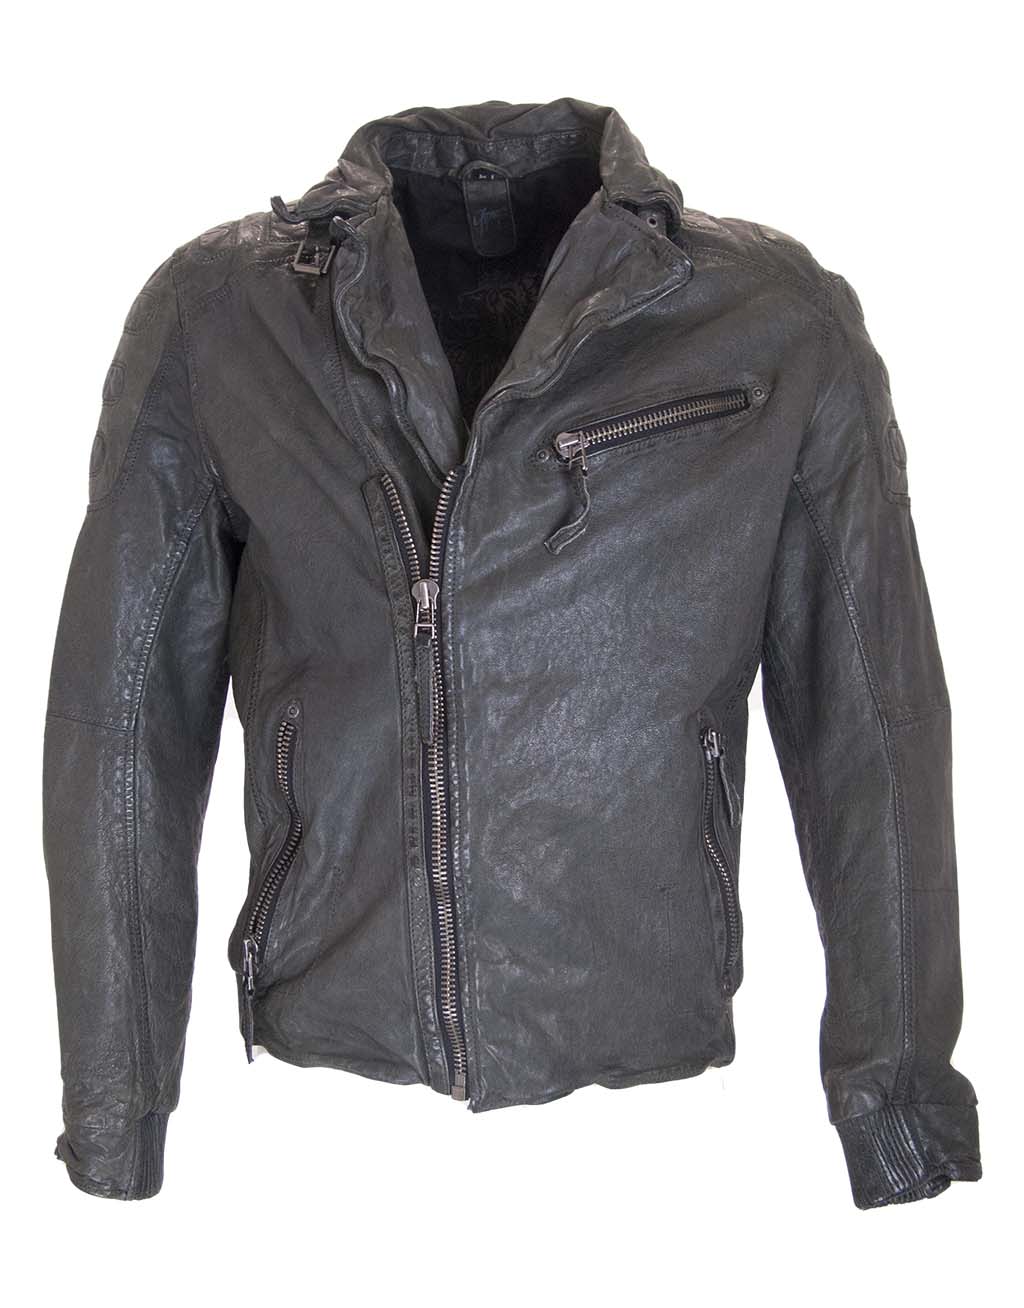 Gipsy by Mauritius Robin Mens Grey Leather Jacket. 100% Genuine leather ...